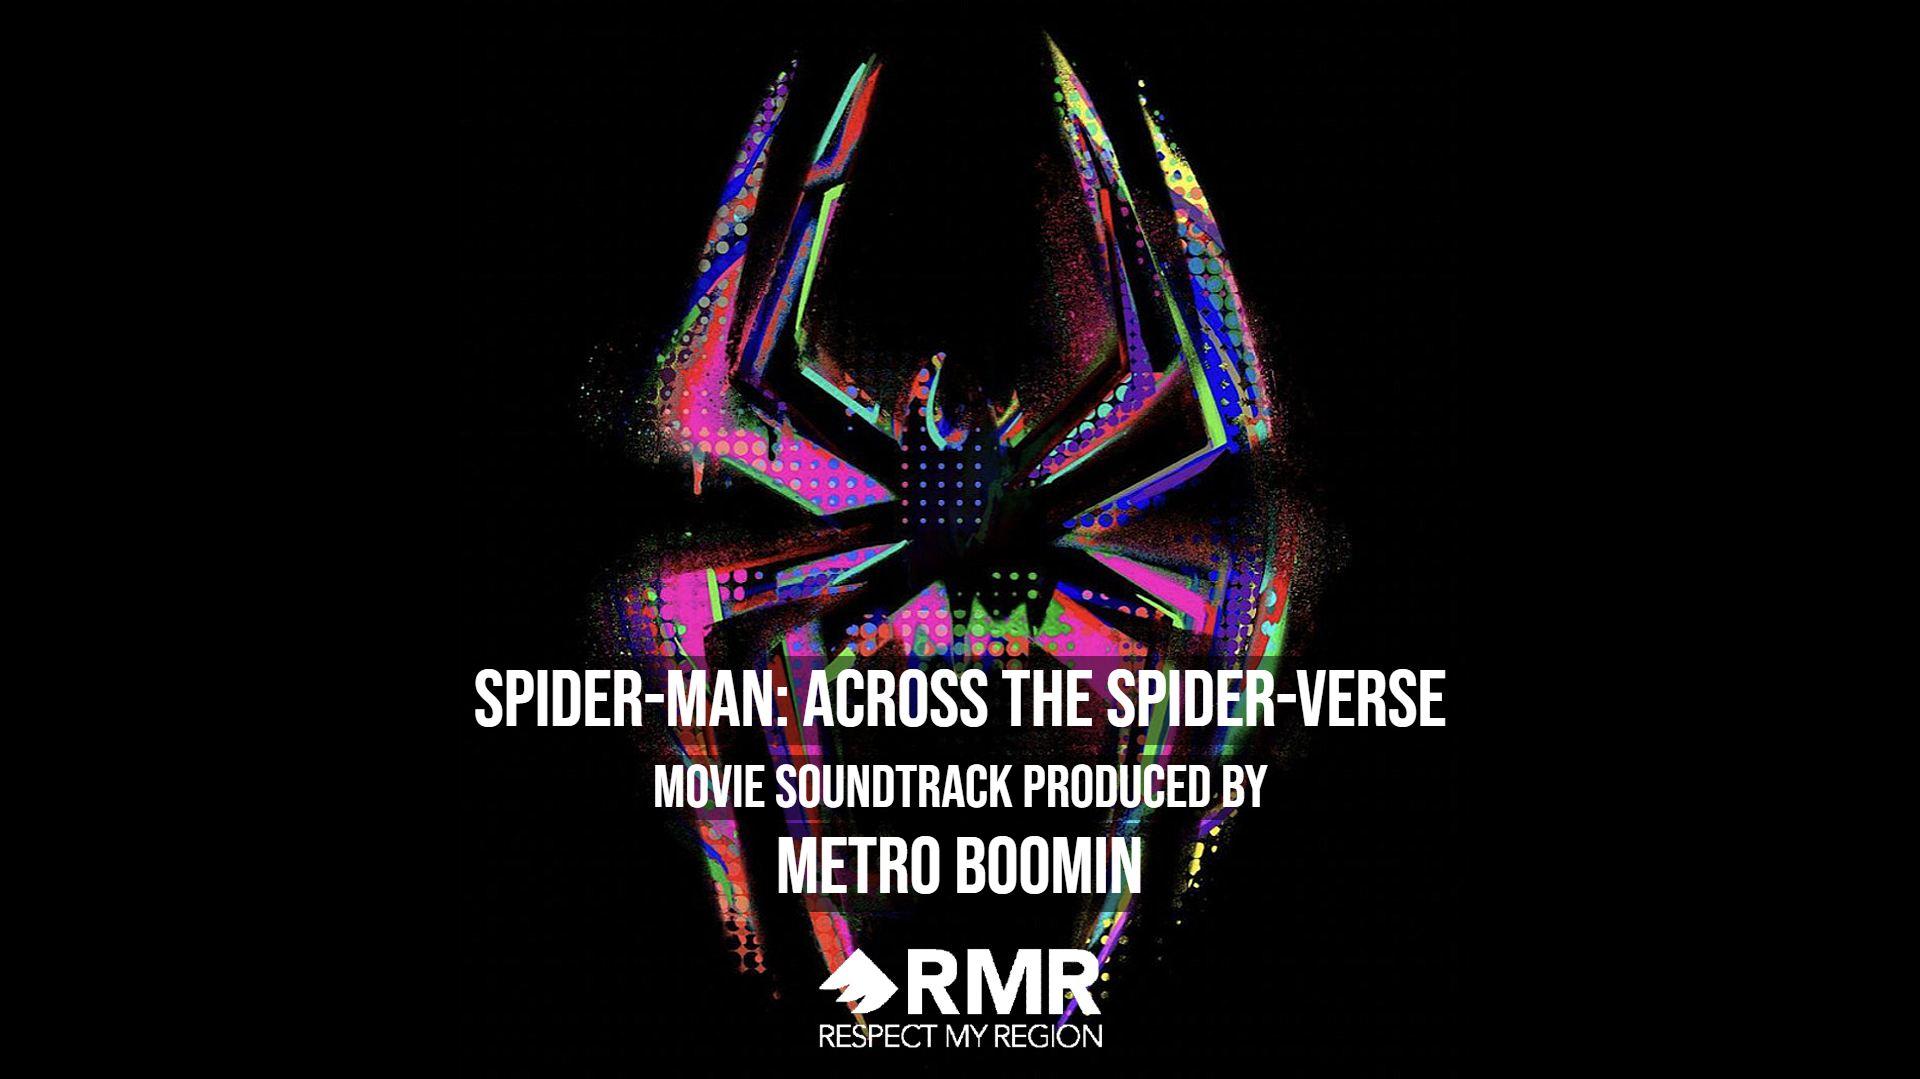 New Spider Man Movie Soundtrack Produced By Metro Boomin